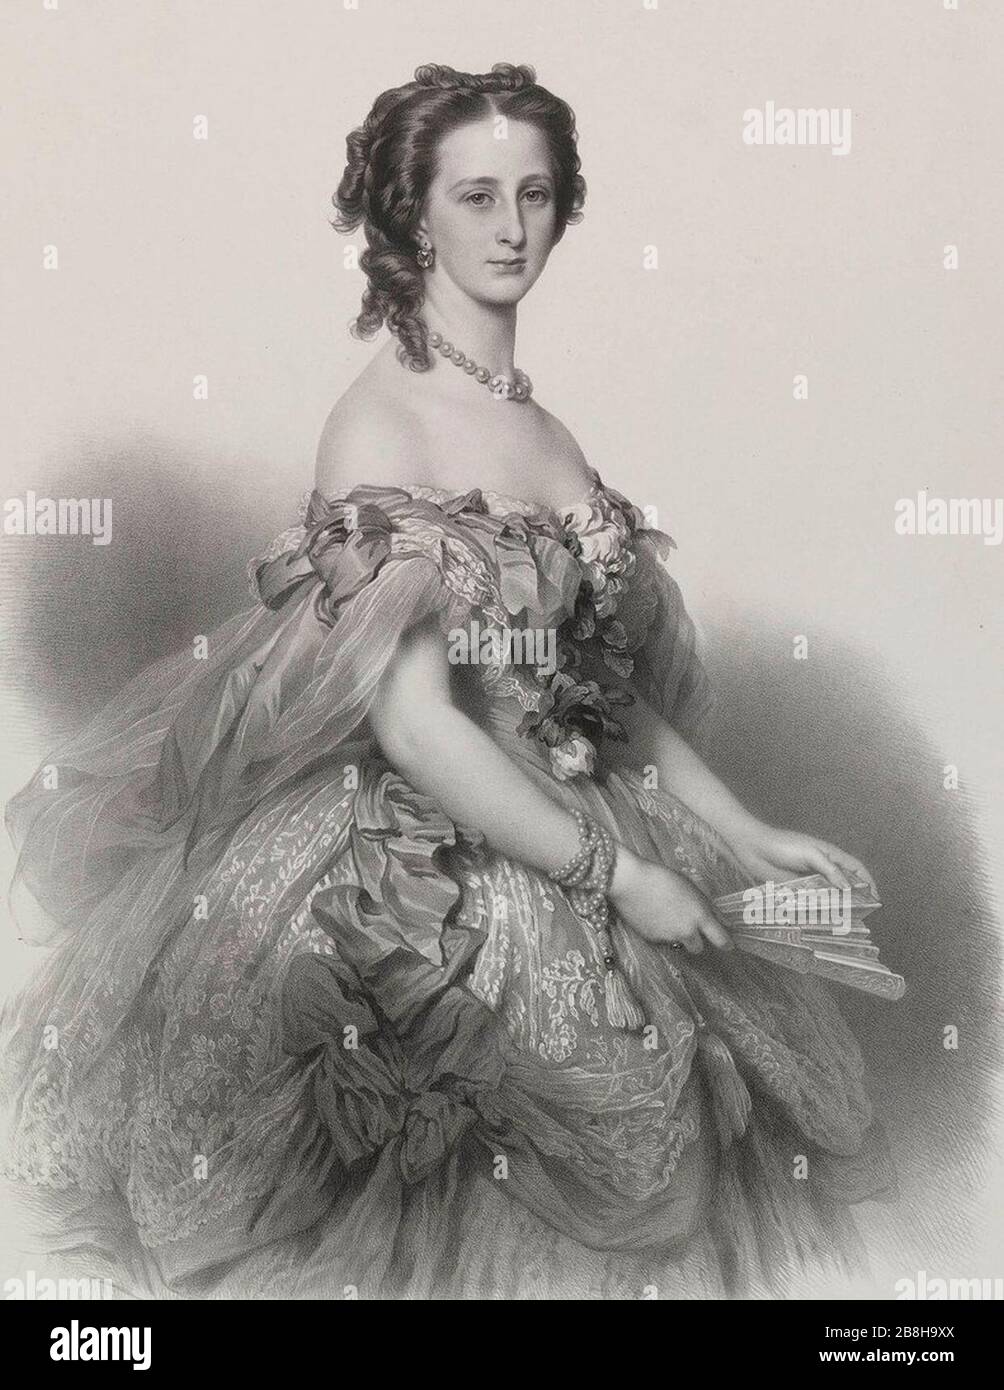 AVAILABLE ON CANVAS EMPRESS ALEXANDRA OF RUSSIA PRINT ALIX OF HESSE TOO